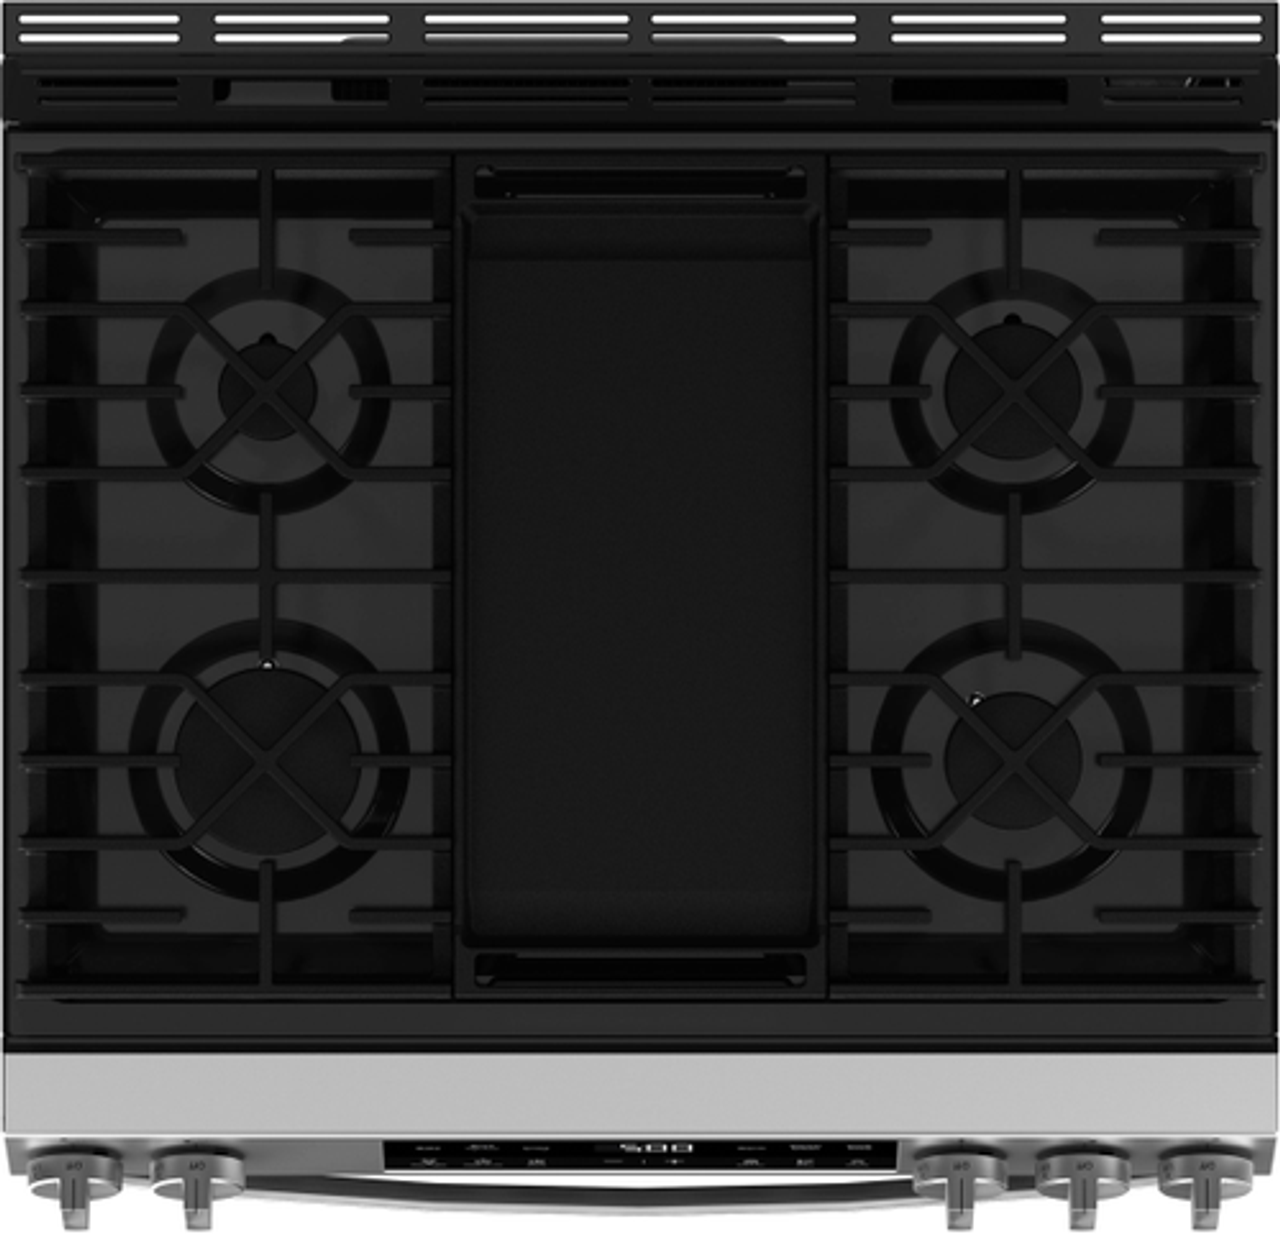 GE - 5.3 Cu. Ft. Slide In Gas Range with Steam Cleaning and Crisp Mode - Stainless Steel